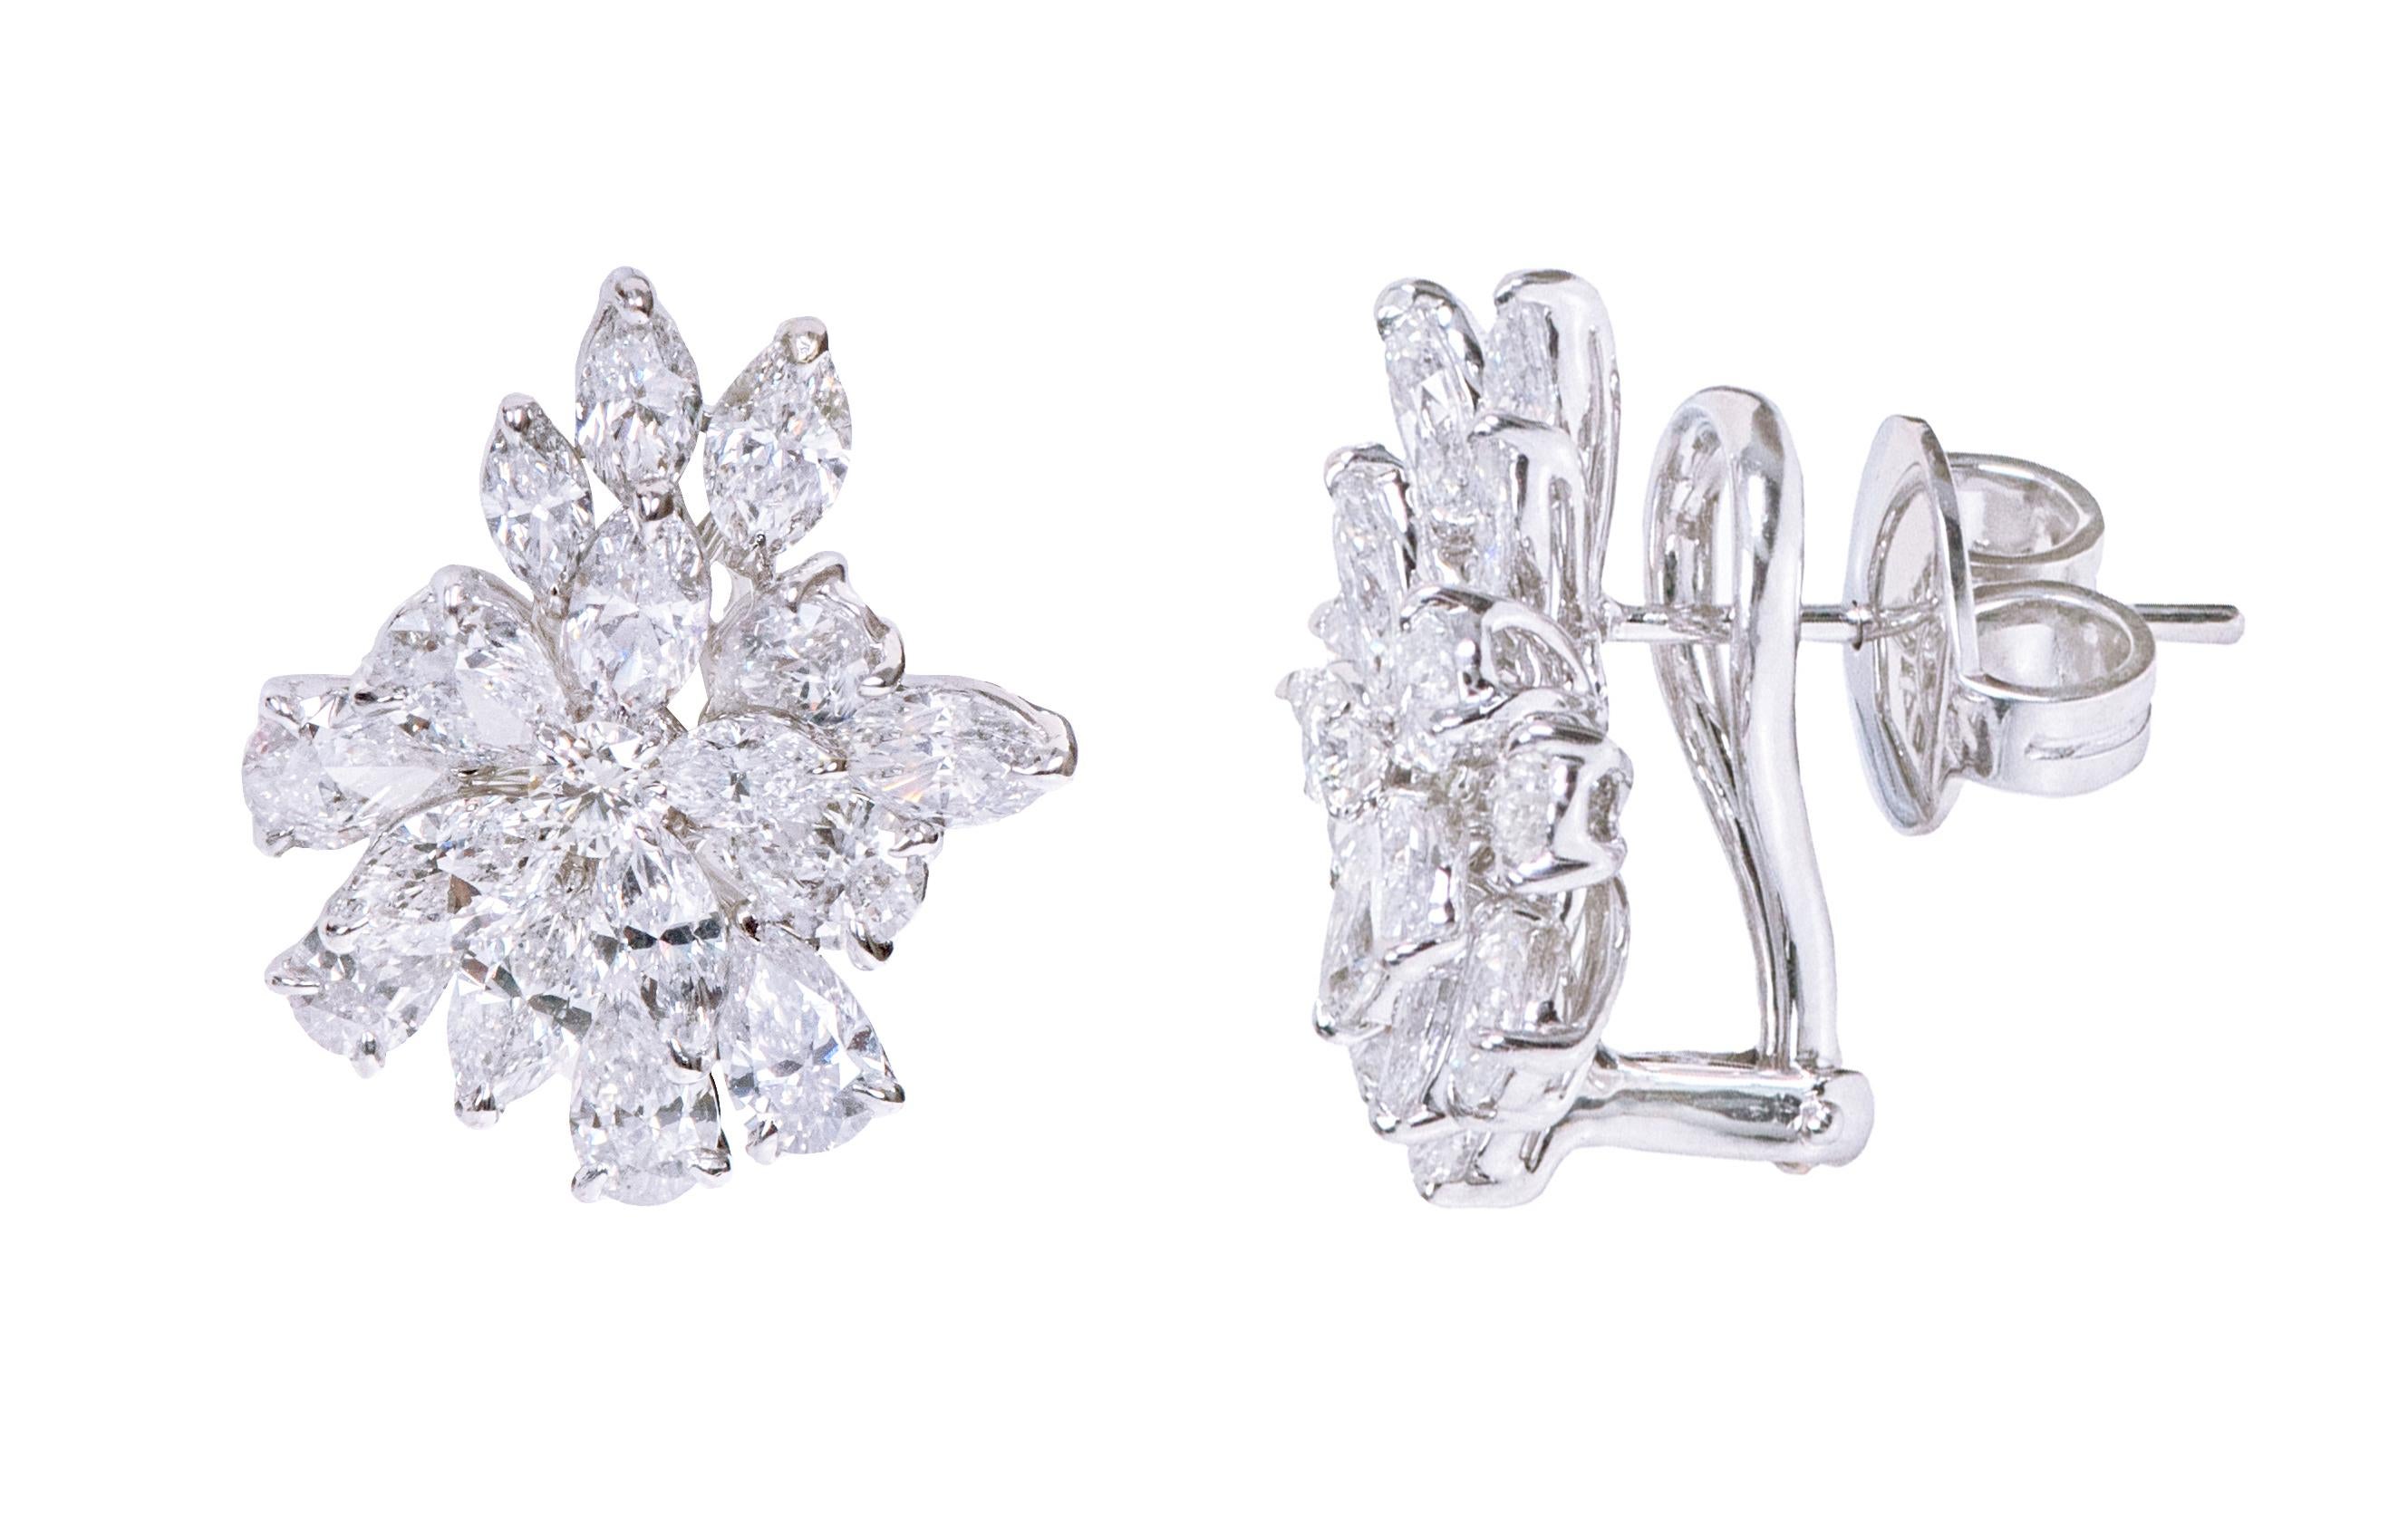 18 Karat White Gold 5.97 Carat Diamond Modulation Cocktail Stud Earrings

This incredible fancy shaped diamond earring is vividly magical. The design is magnificently created in 4 different levels to layered one over another and slightly angled to